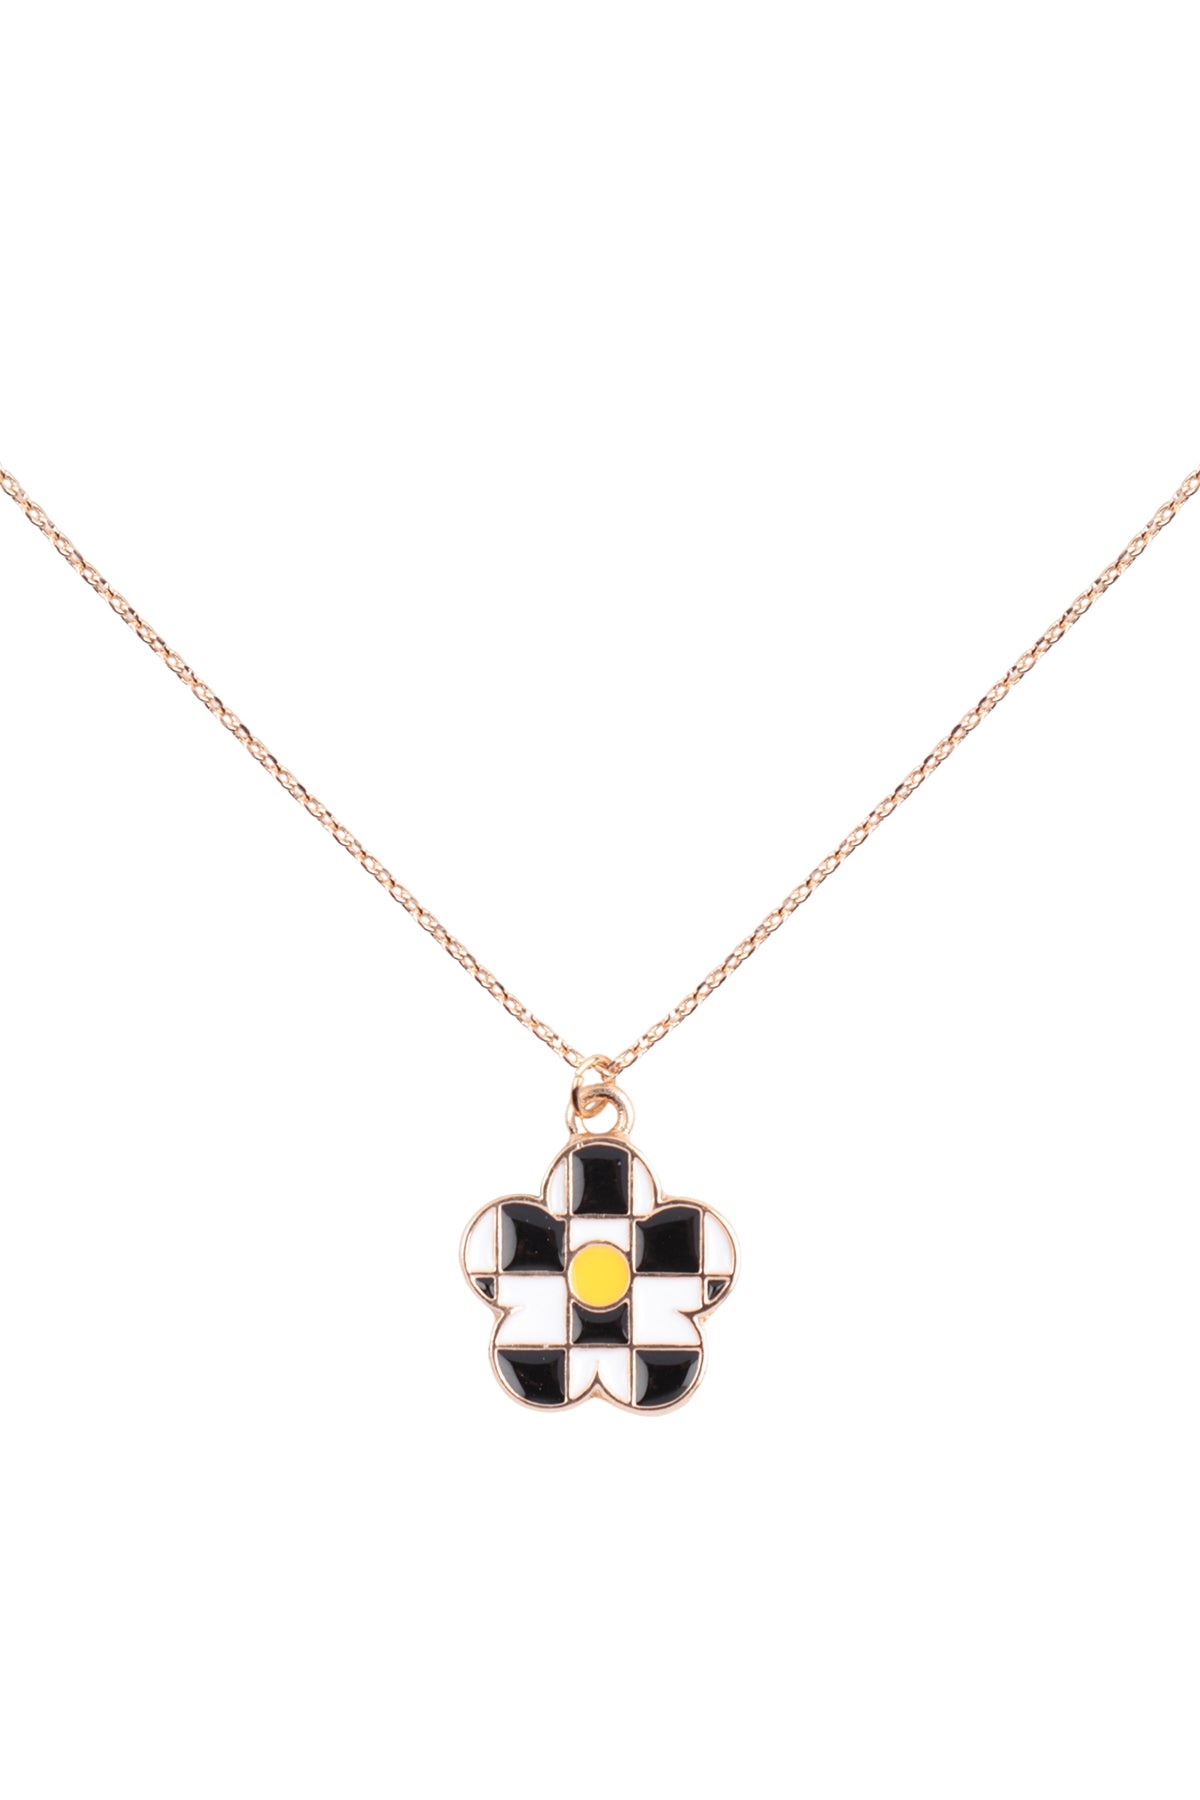 CHECKERED PATTERN FLOWER PENDANT NECKLACE